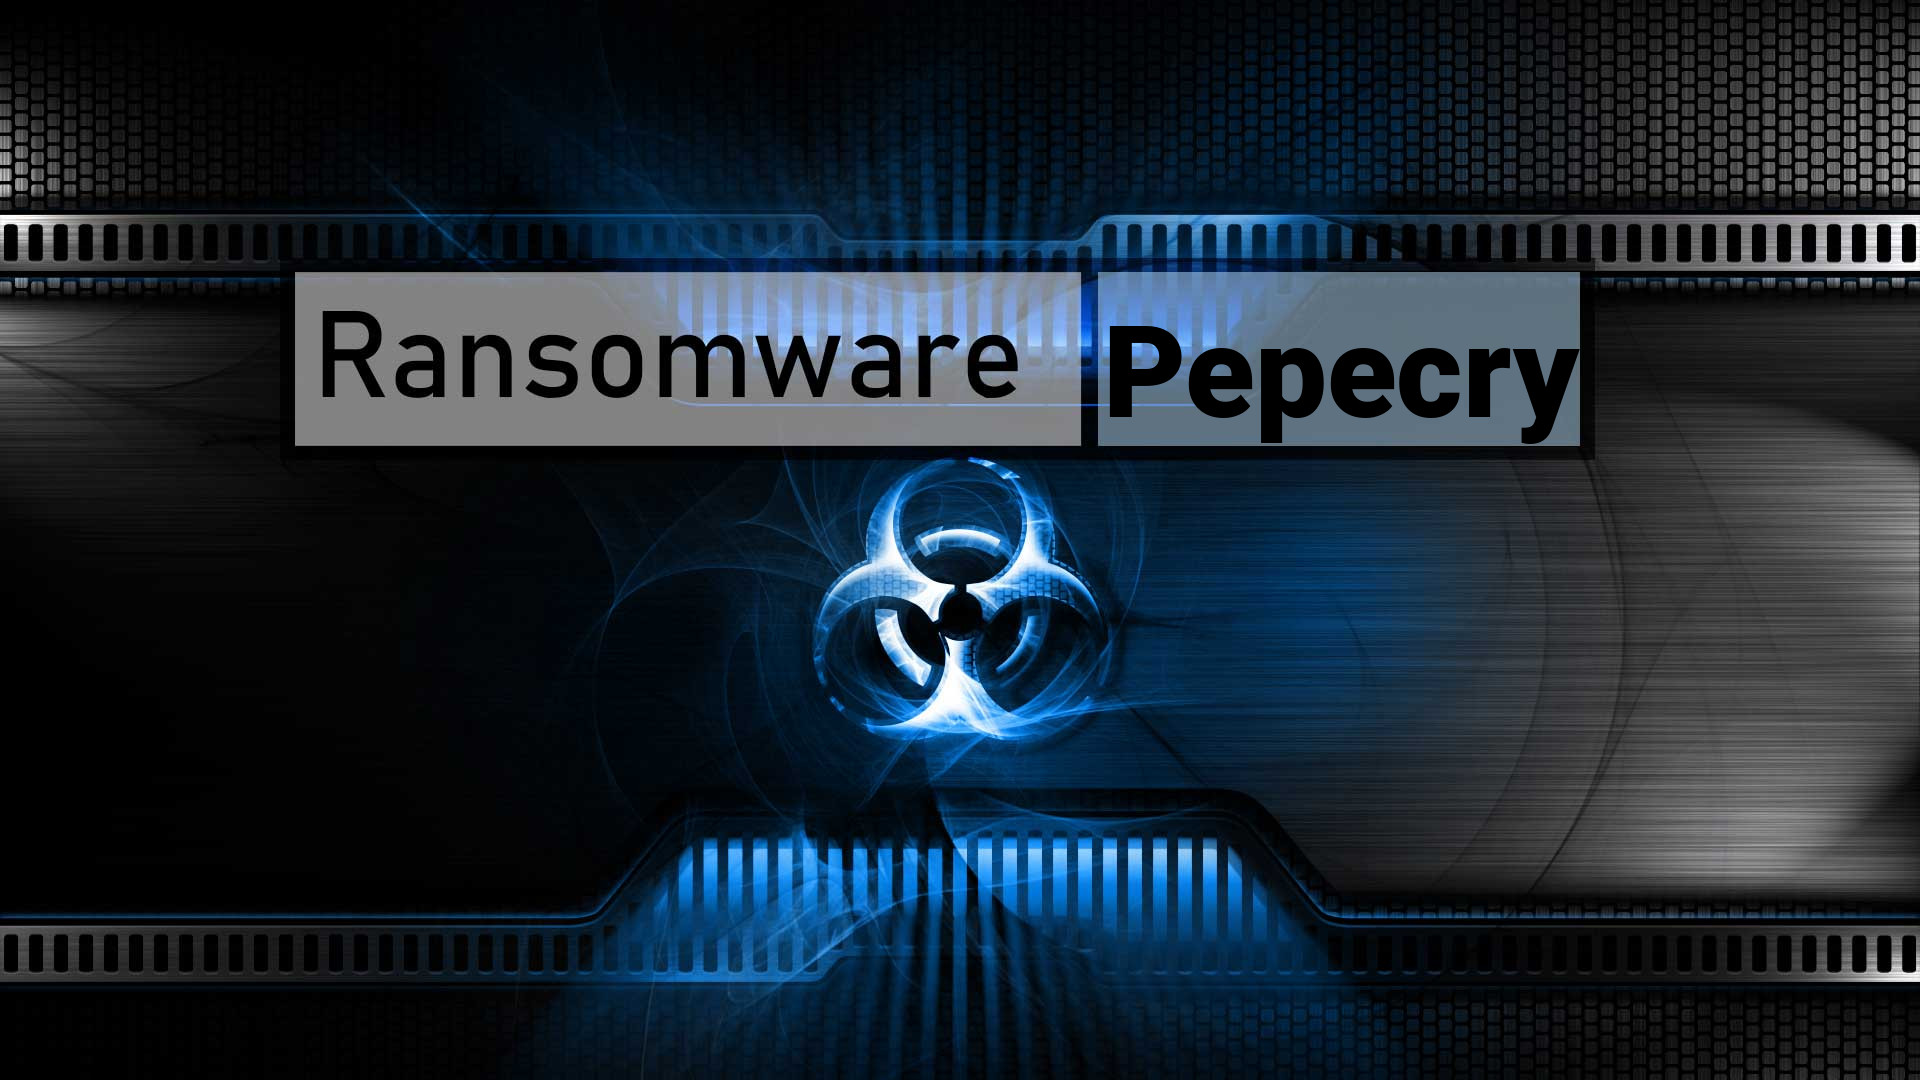 PEPECRY Ransomware 🔐 (.CRY File) — Removal Guide